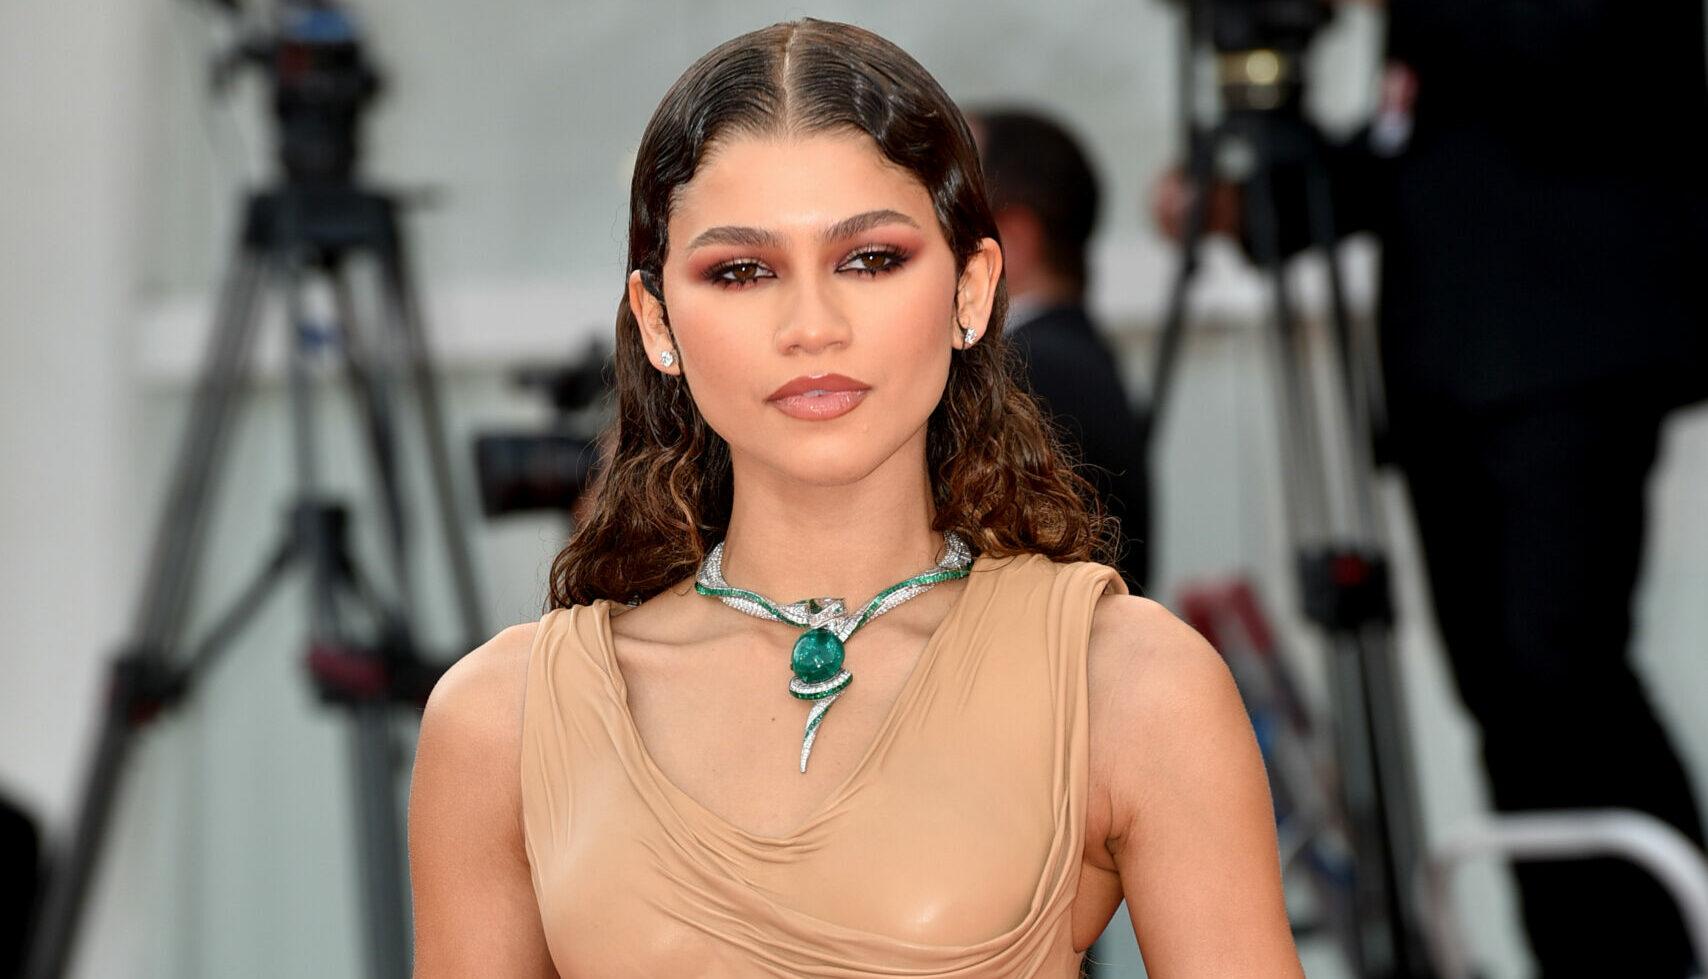 Zendaya’s Skipping The Met Gala Because of Her Busy Schedule